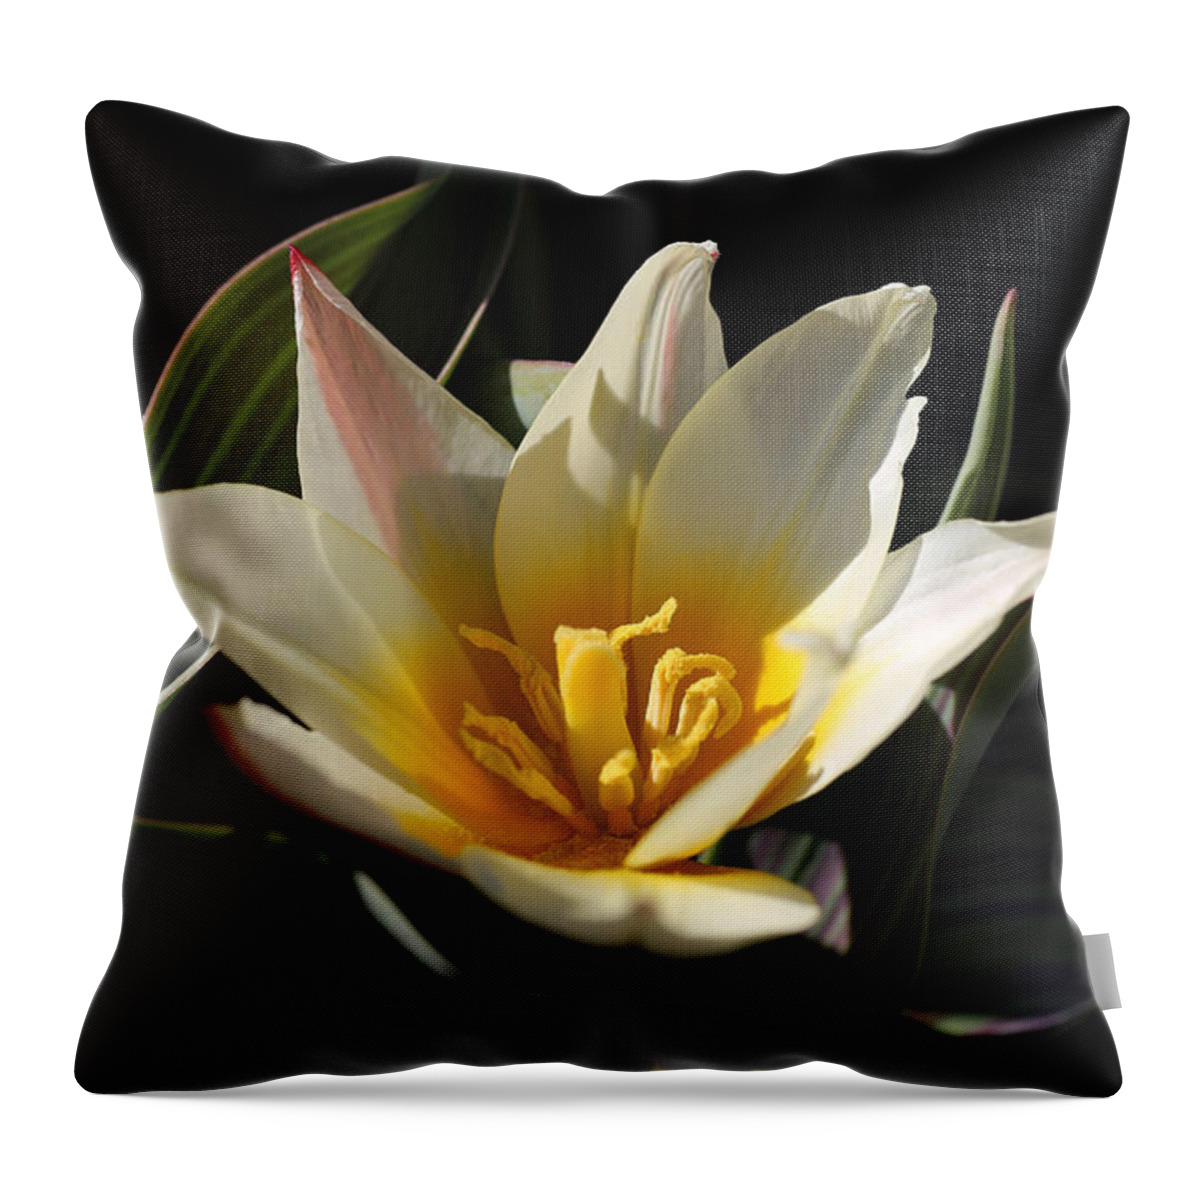 Tulip Throw Pillow featuring the photograph Spiky Tulip by Tammy Pool